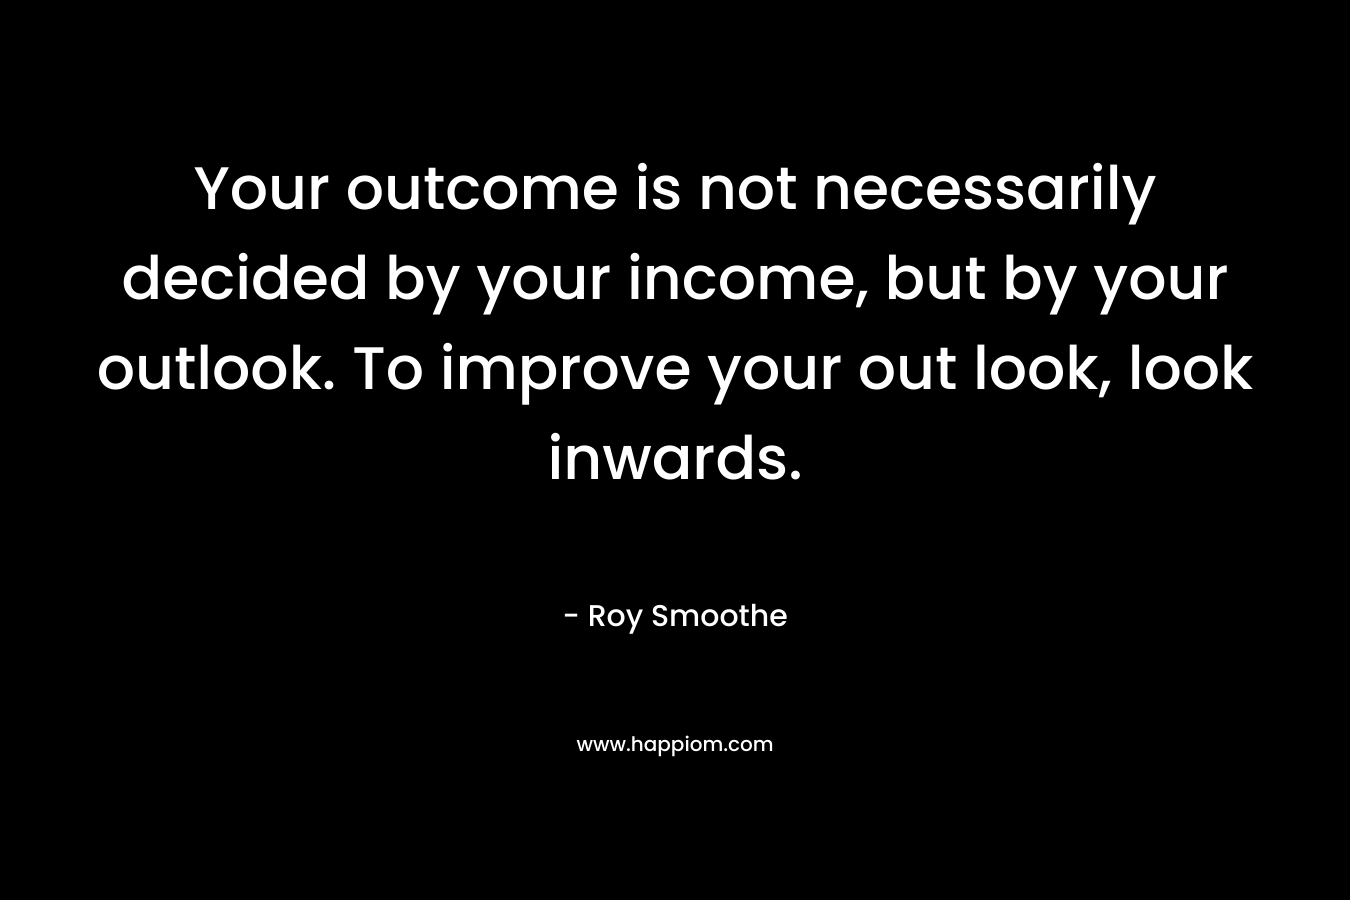 Your outcome is not necessarily decided by your income, but by your outlook. To improve your out look, look inwards. – Roy Smoothe